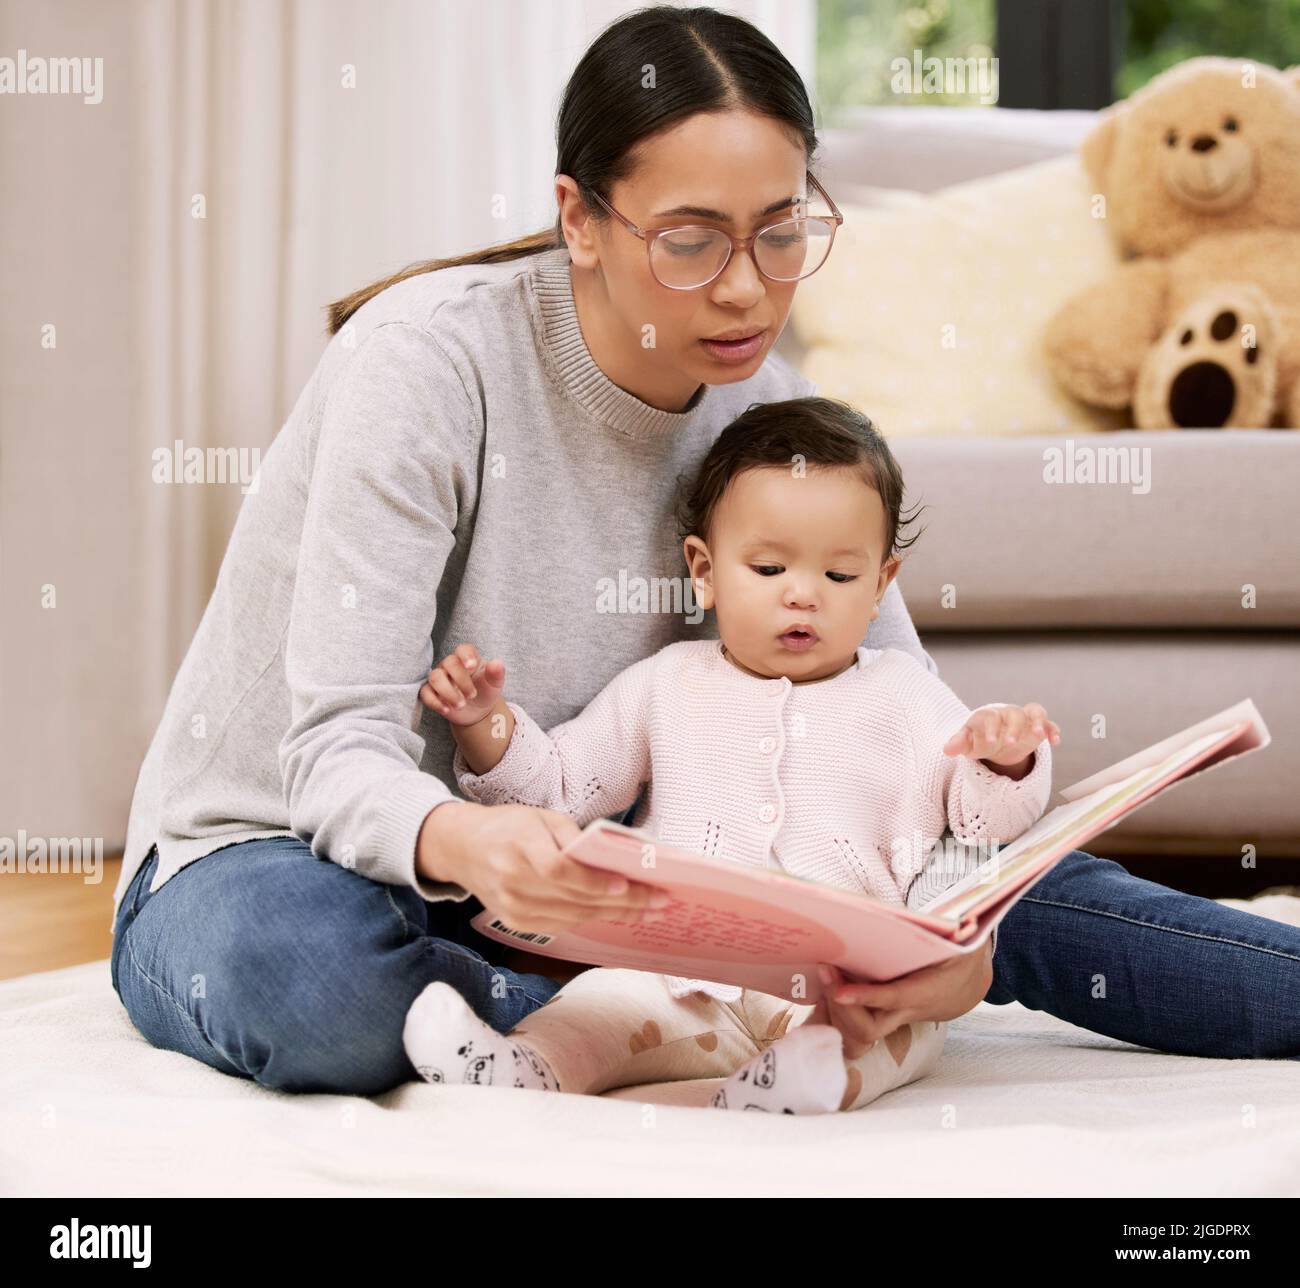 With every newborn baby, a little sun rises. Shot a mother reading a book to her baby at home. Stock Photo